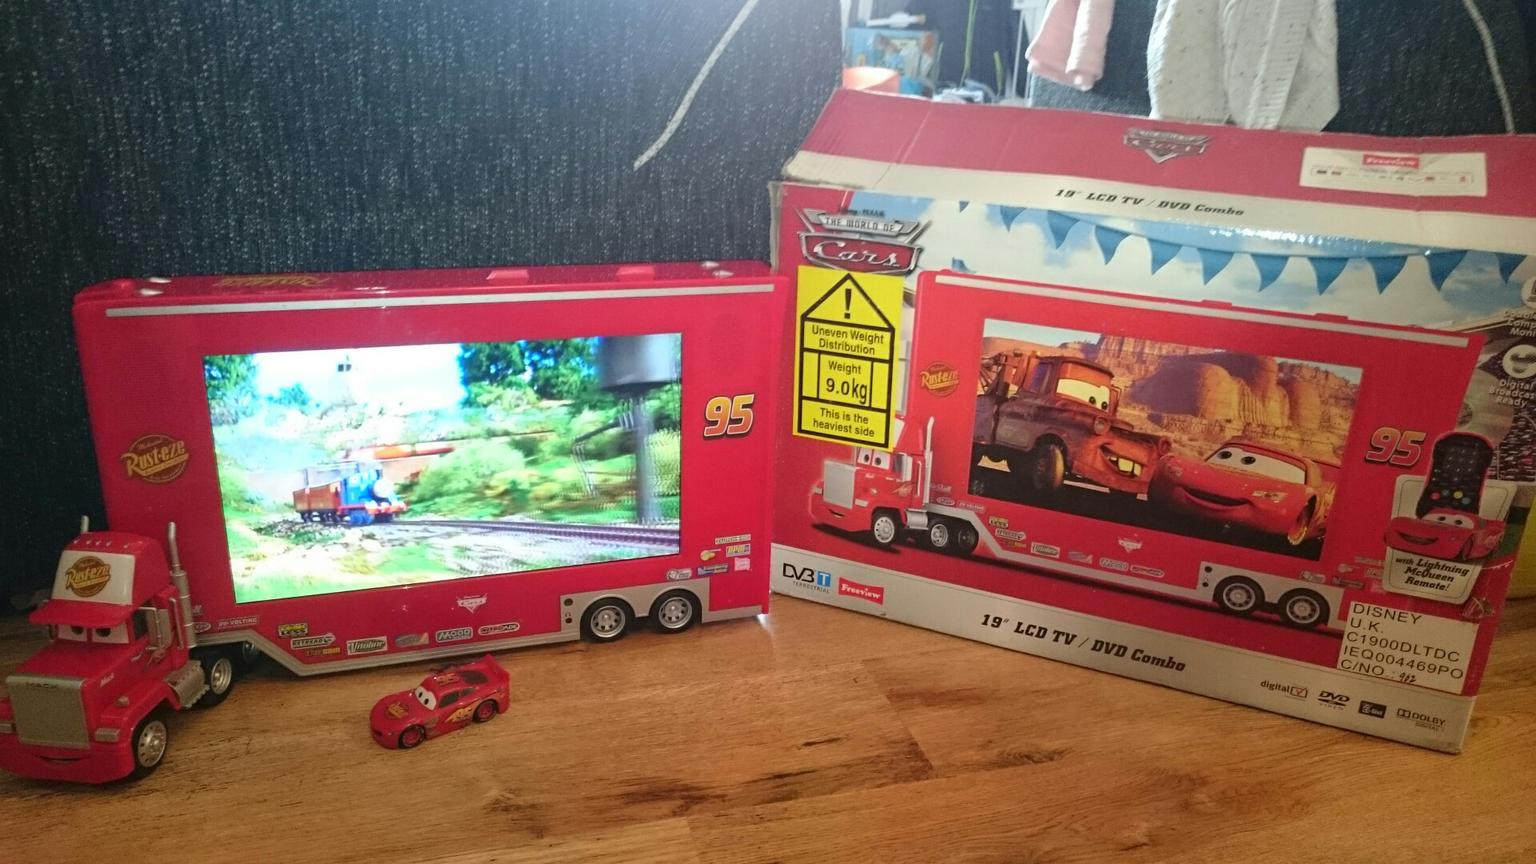 Disney Cars Mac Truck 19 Lcd Tv Dvd Combo In 0 Bromwich For 90 00 For Sale Shpock